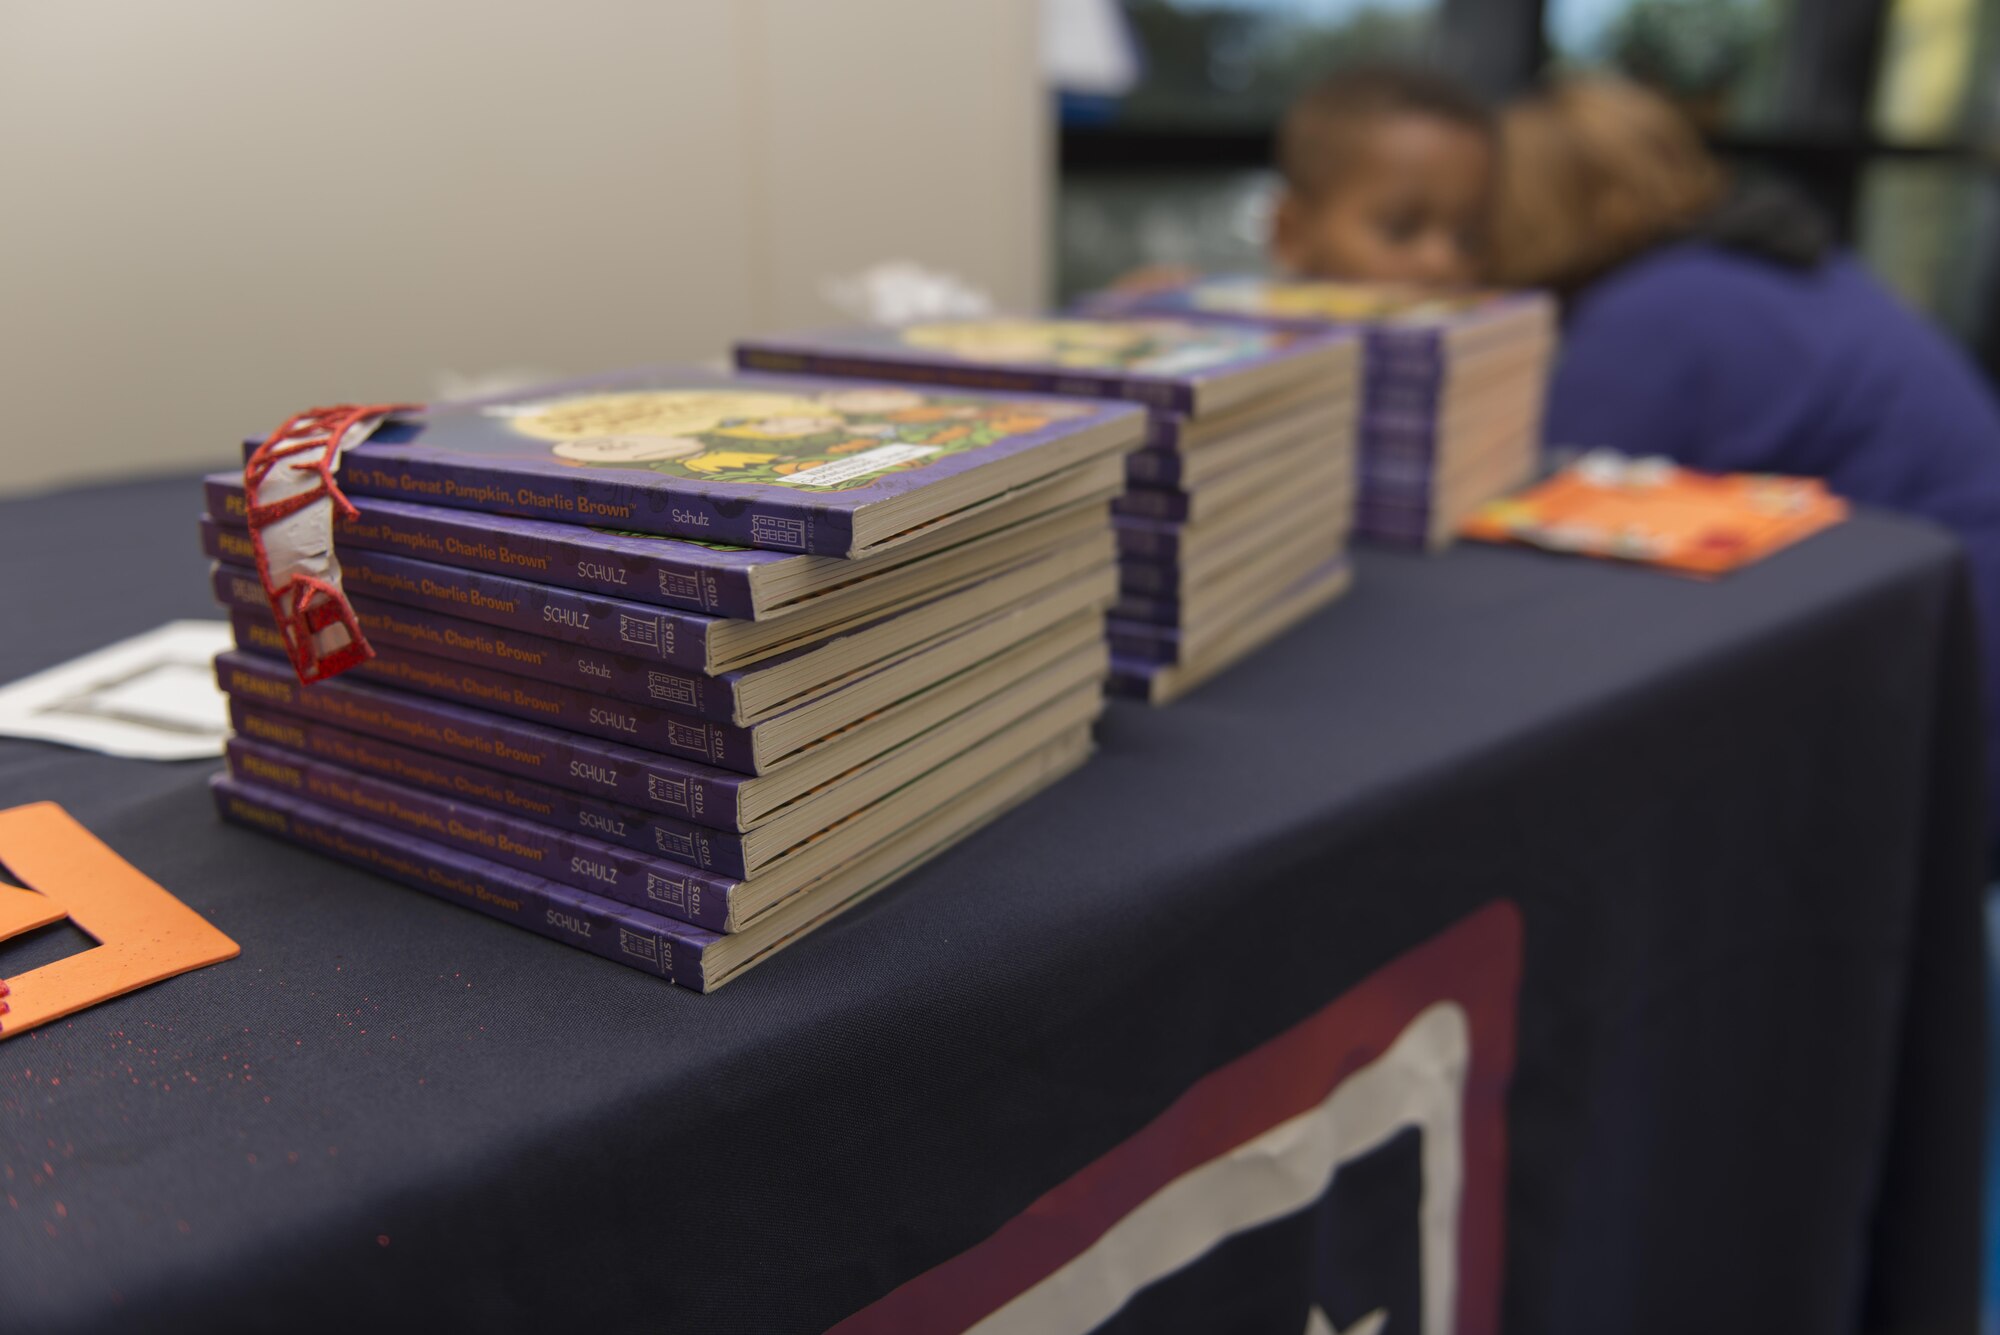 Copies of “It’s the Great Pumpkin, Charlie Brown” sit on display at the Child Development Center Oct. 12, 2016 on Keesler Air Force Base, Miss. To commemorate the book’s 50th anniversary, members of the USO read the story to children at the CDC. (U.S. Air Force photo by Andre’ Askew/Released) 